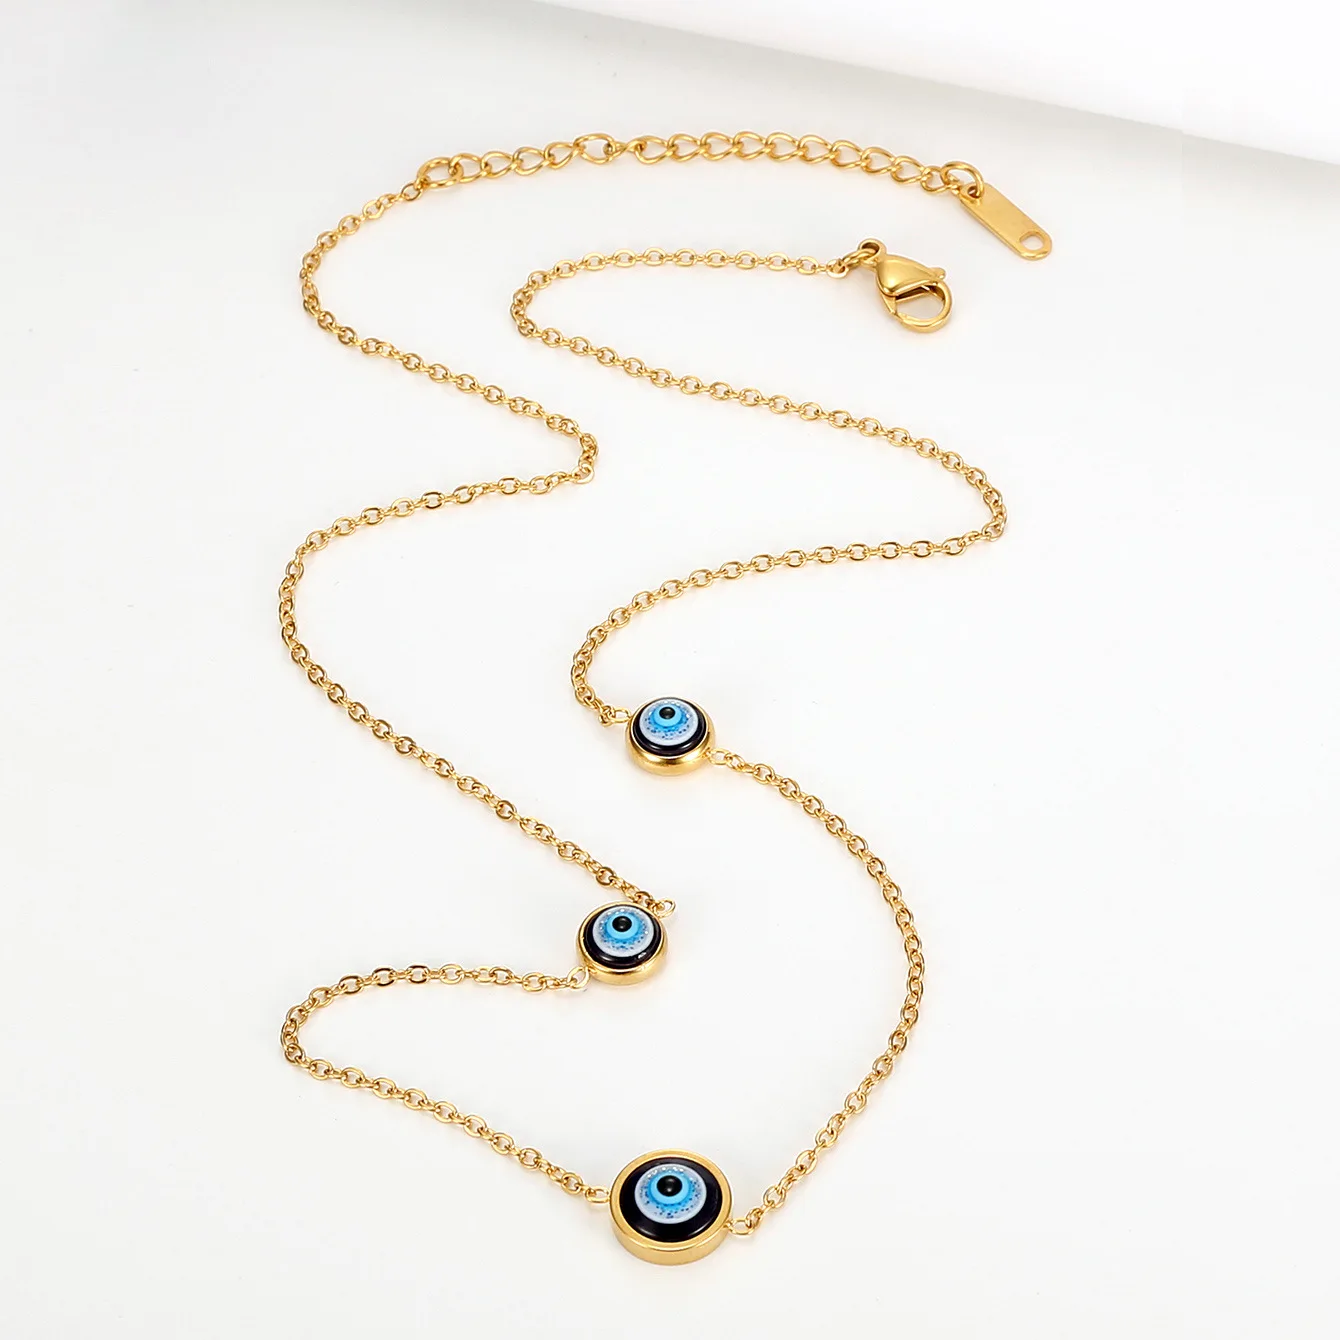 

Fashion Stainless Steel Jewelry Necklaces Round Blue Eye Gold Clavicle Pendant Charm Chain Single/multilayer Necklace For Women